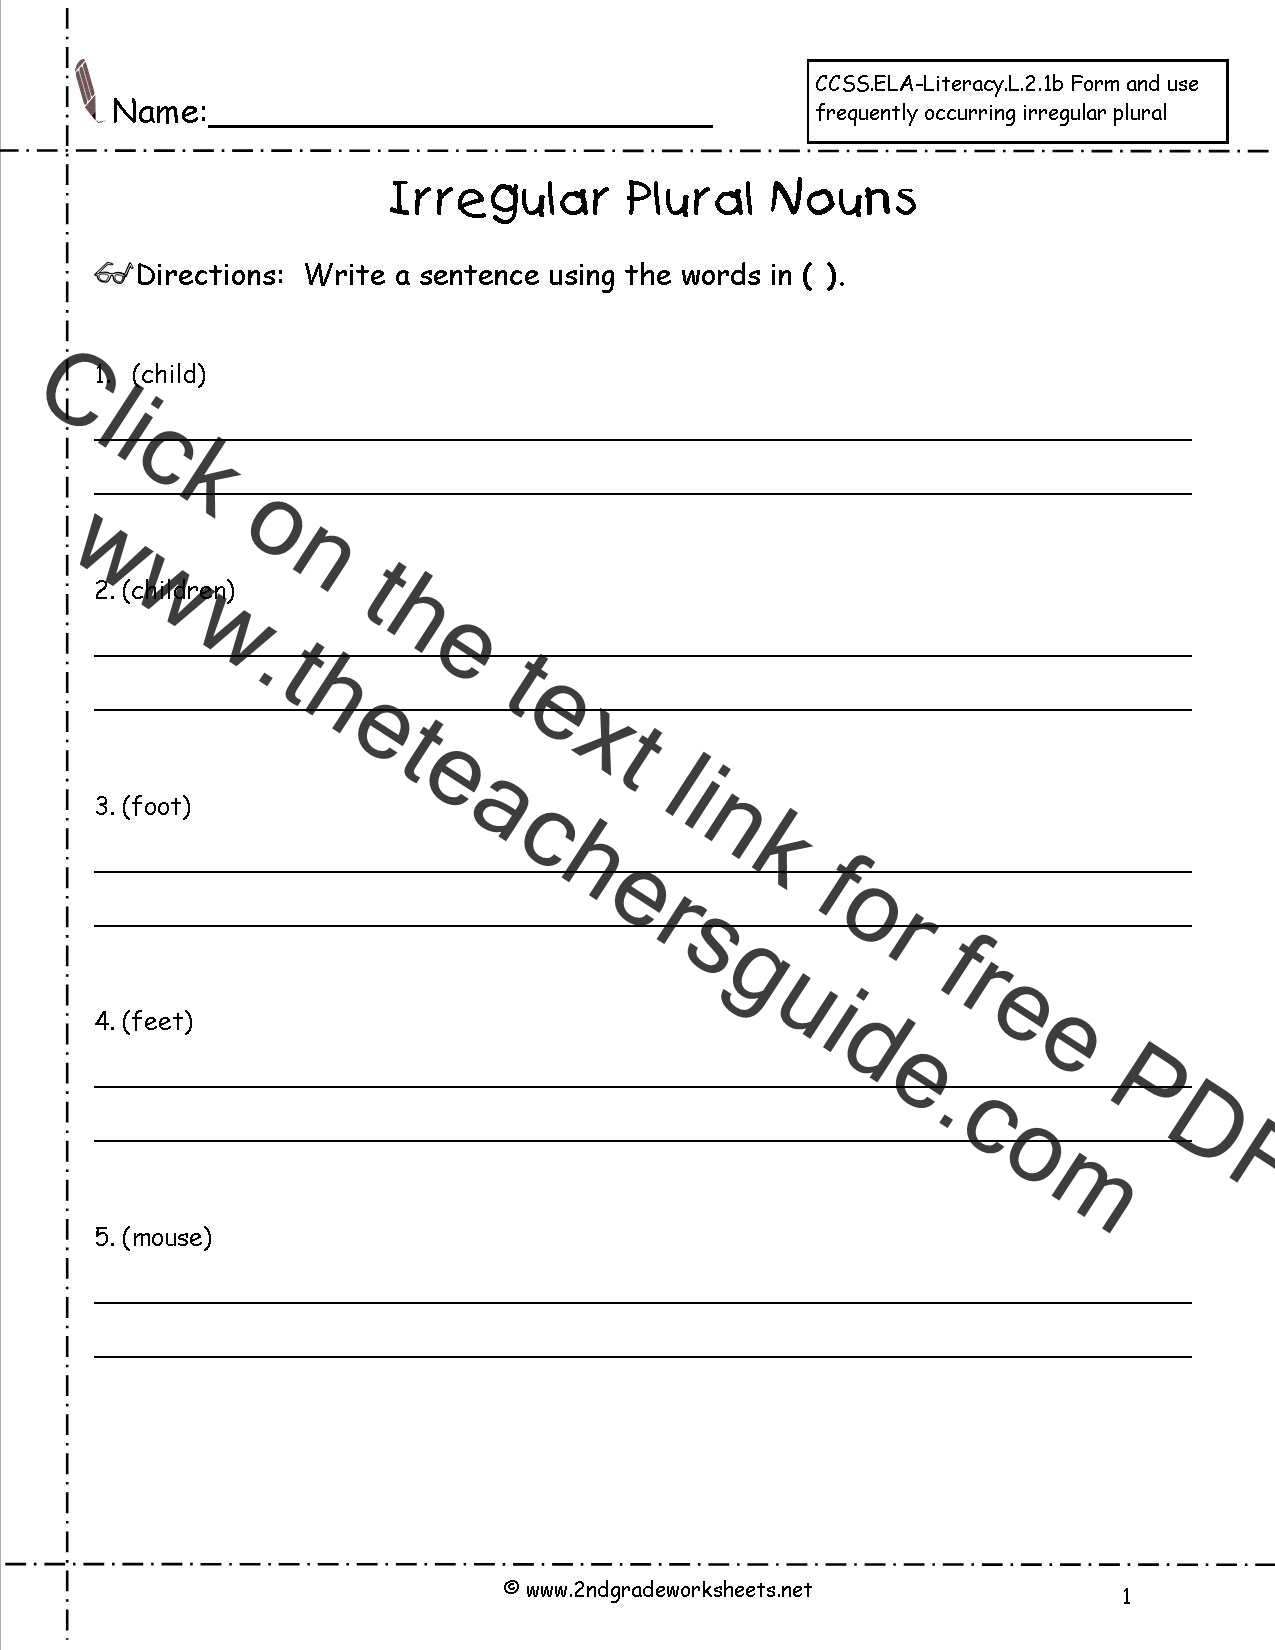 pin-on-worksheets-activities